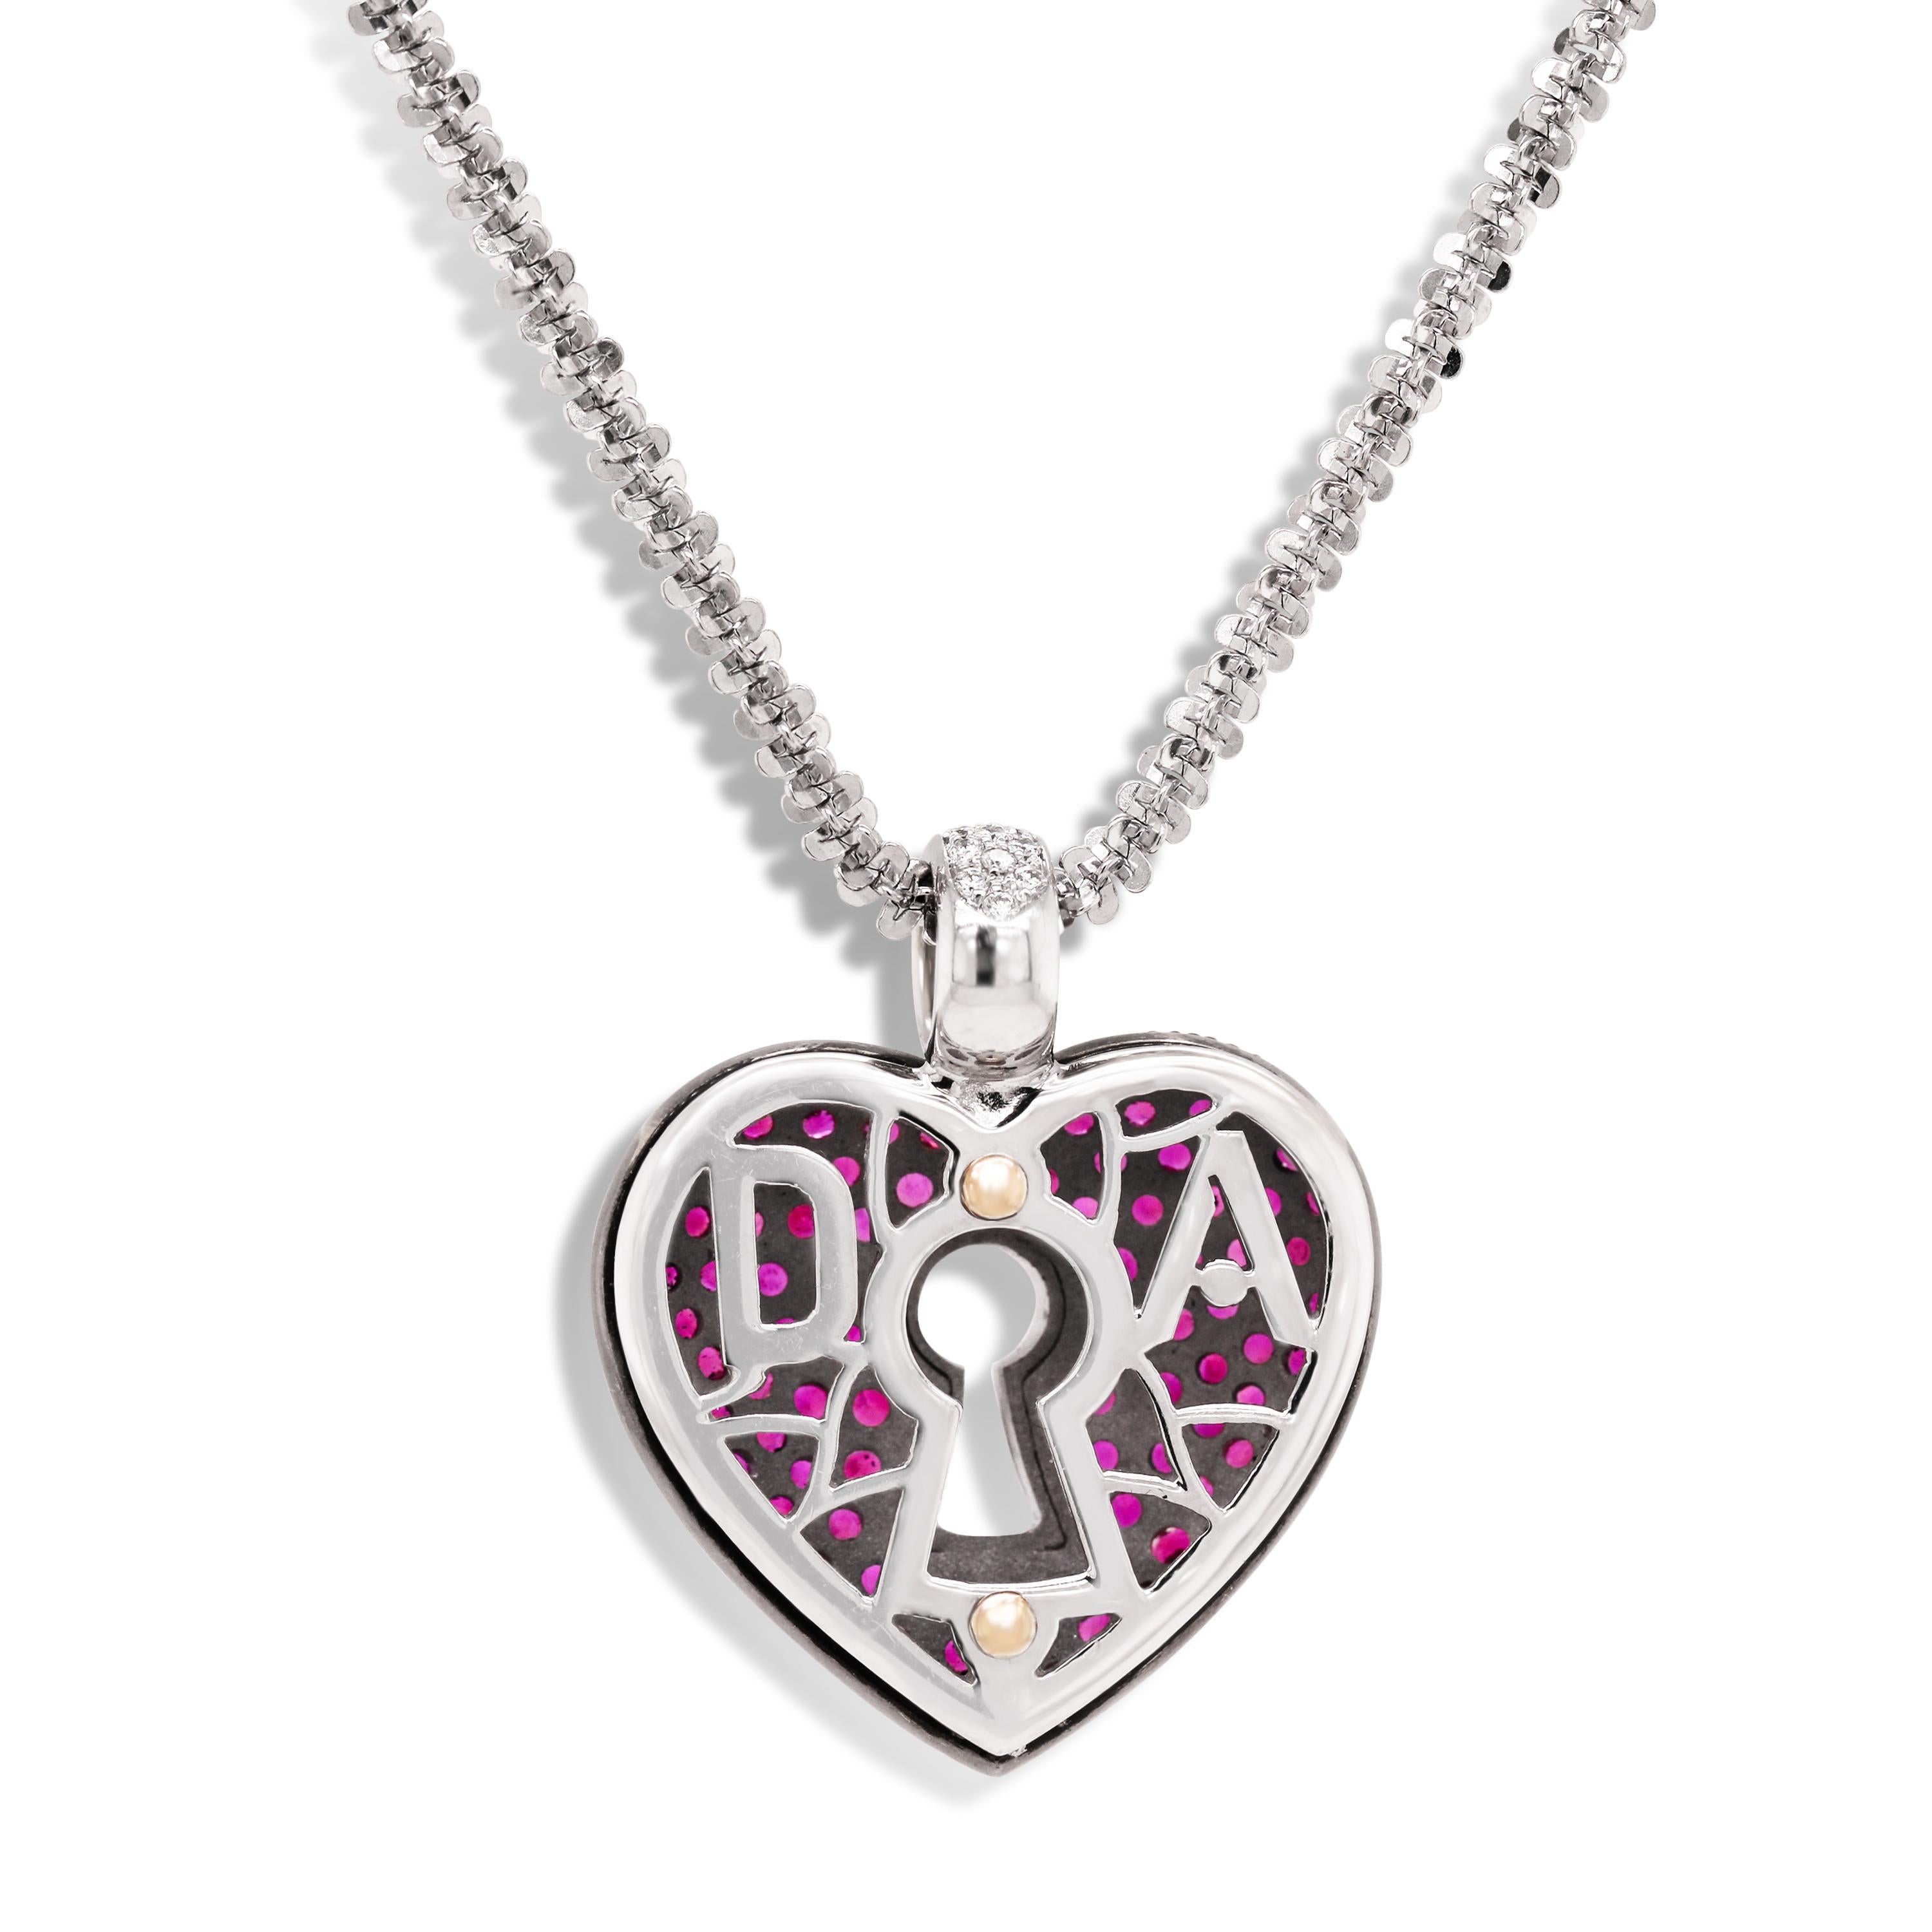 14K White Gold Pink Sapphire Diamond Heart Pendant Diamond Cut Chain Necklace

This gorgeous one-of-a-kind piece features a pink-sapphire set heart pendant with diamonds on the bail and center. The back of the pendant is stamped by a designer, 